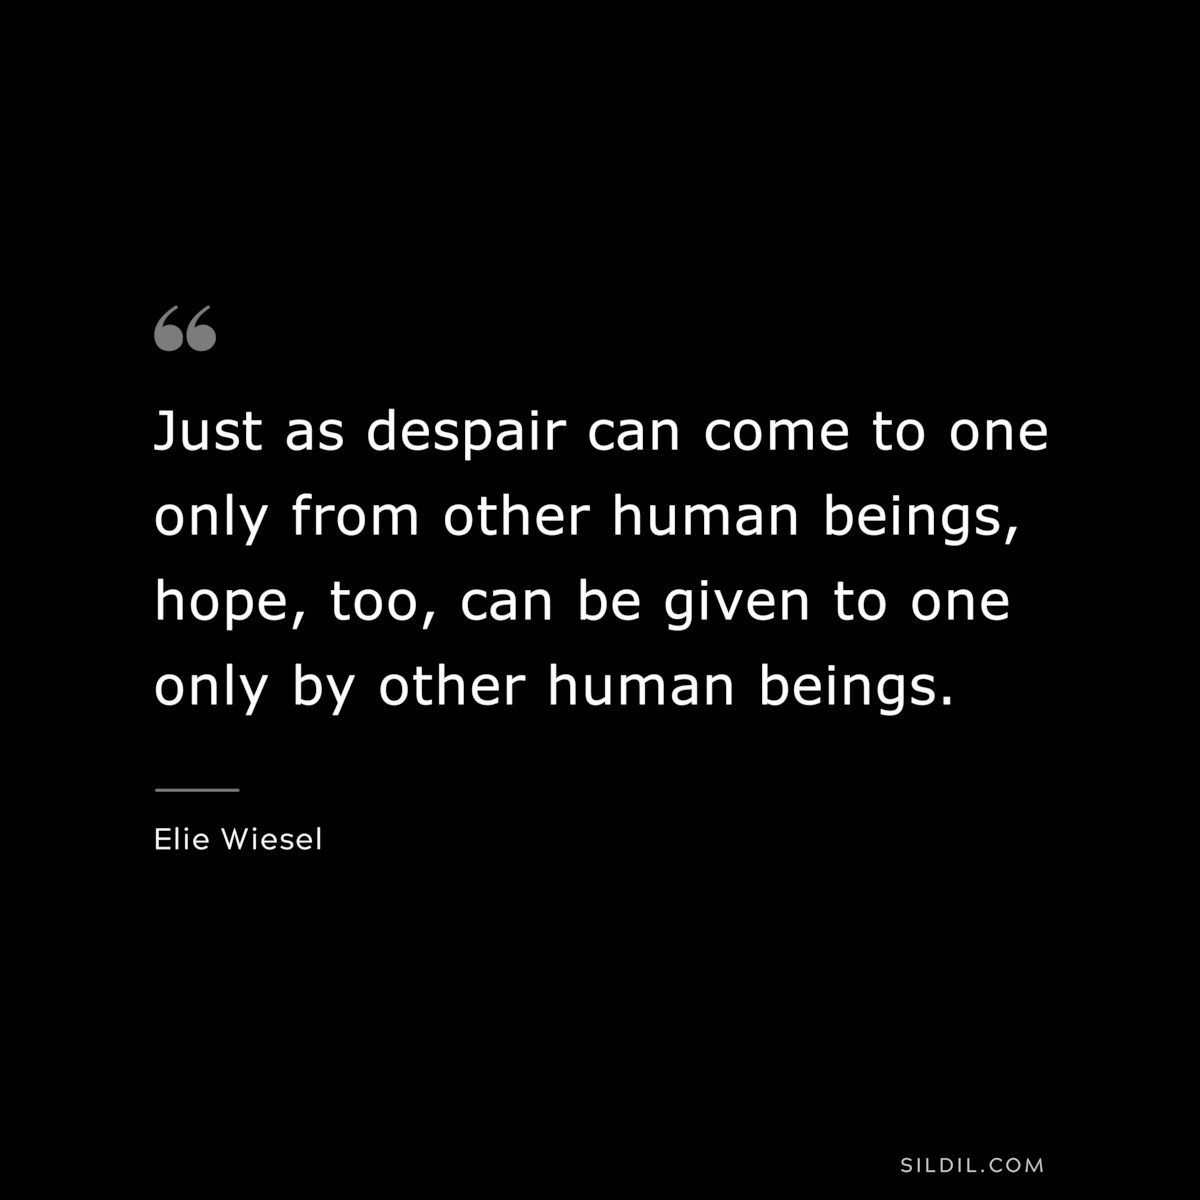 Just as despair can come to one only from other human beings, hope, too, can be given to one only by other human beings. ― Elie Wiesel